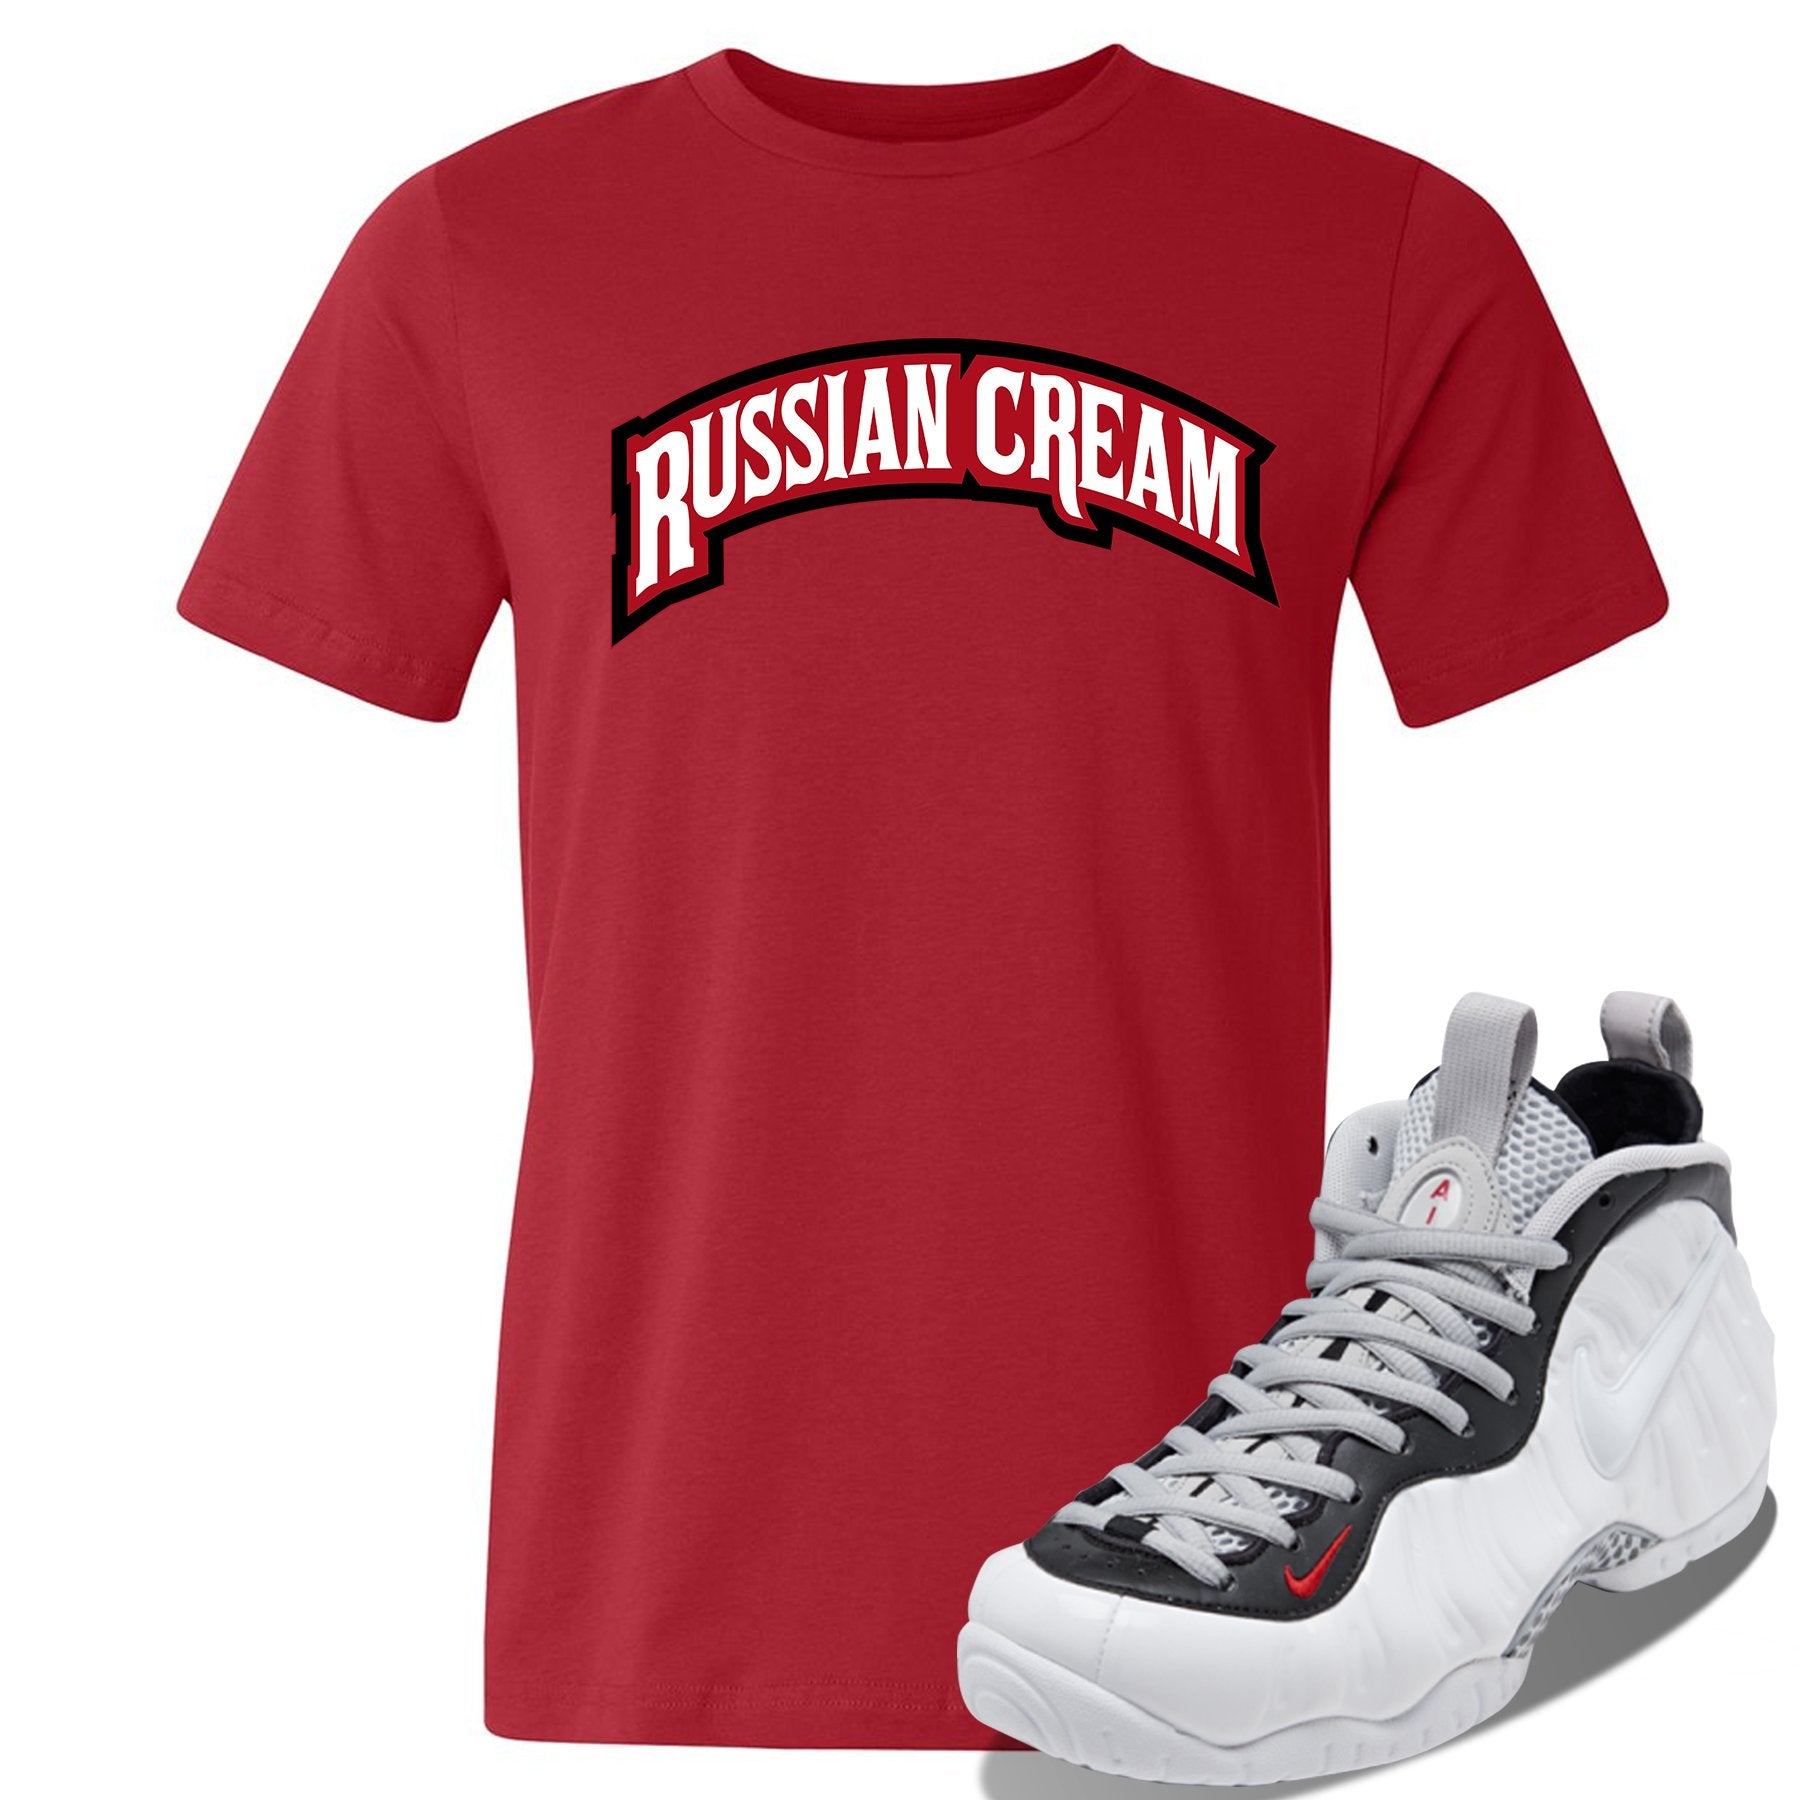 Foamposite Pro White Black University Red Sneaker Red T Shirt | Tees to match Nike Air Foamposite Pro White Black University Red Shoes | Russian Cream Arch